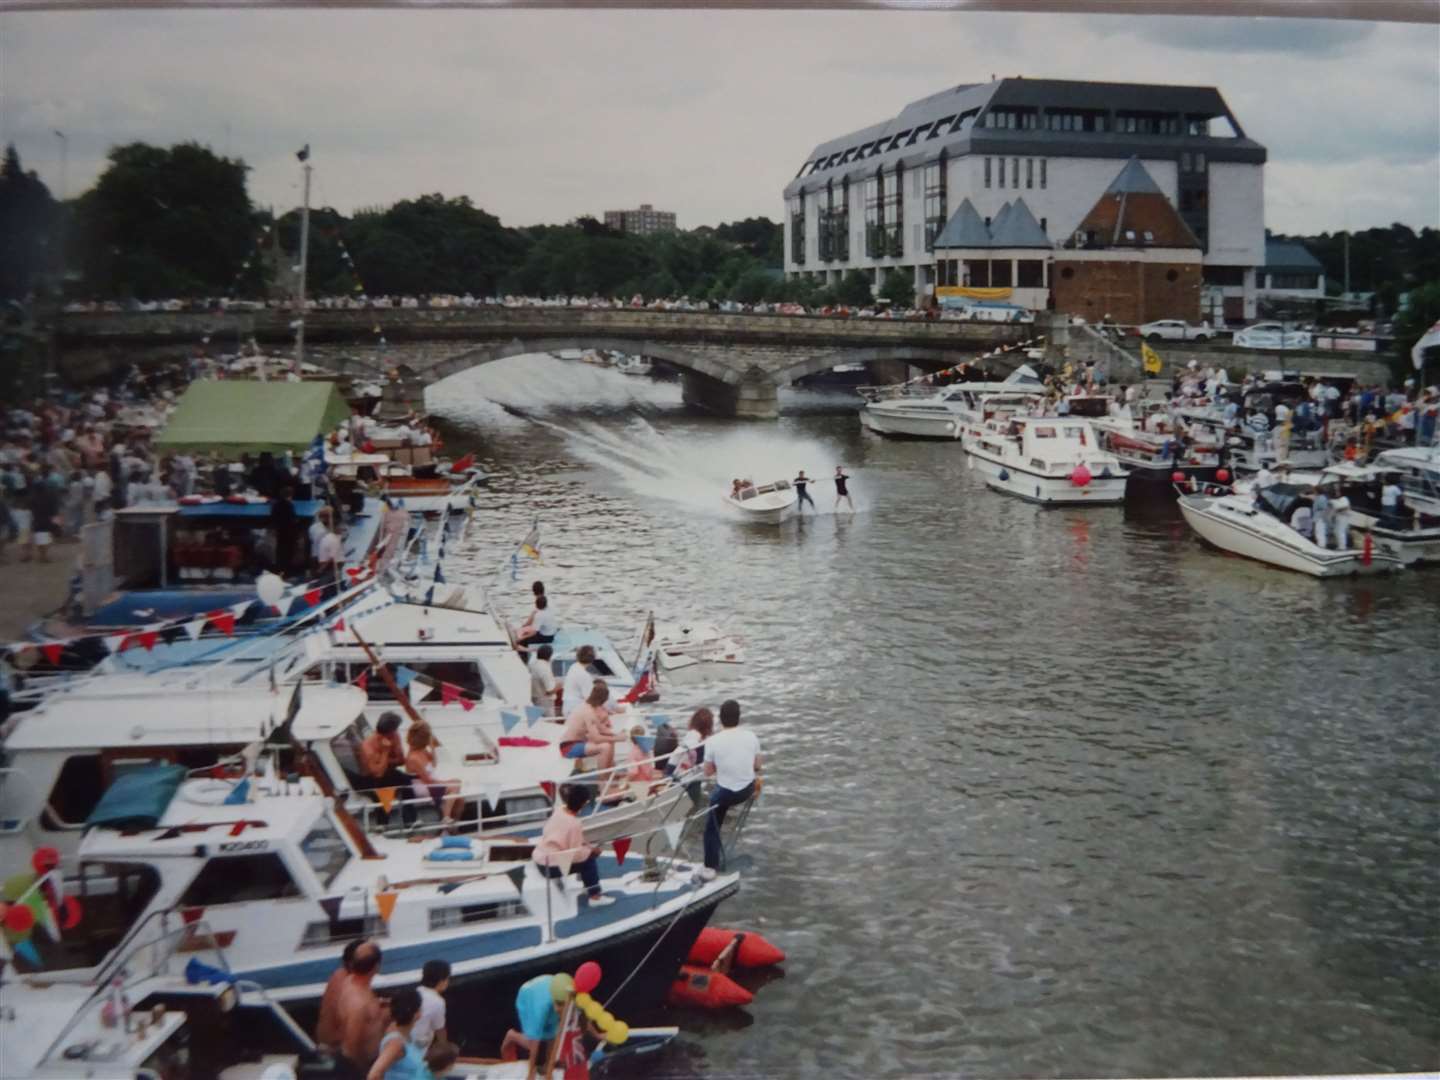 A scene from an early Maidstone River Festival, Dave Stephens co-ordinating